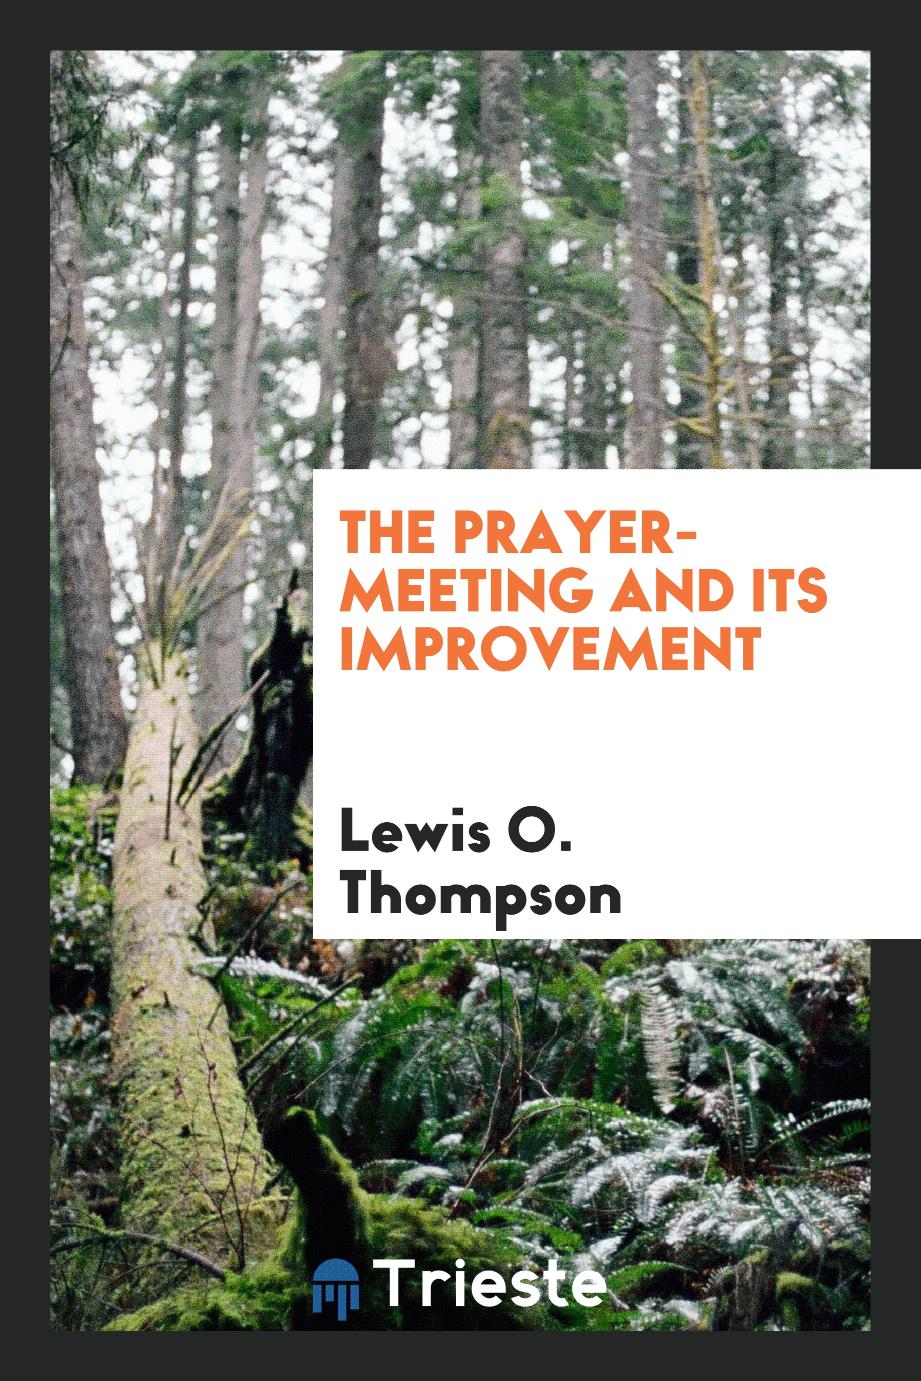 The prayer-meeting and its improvement